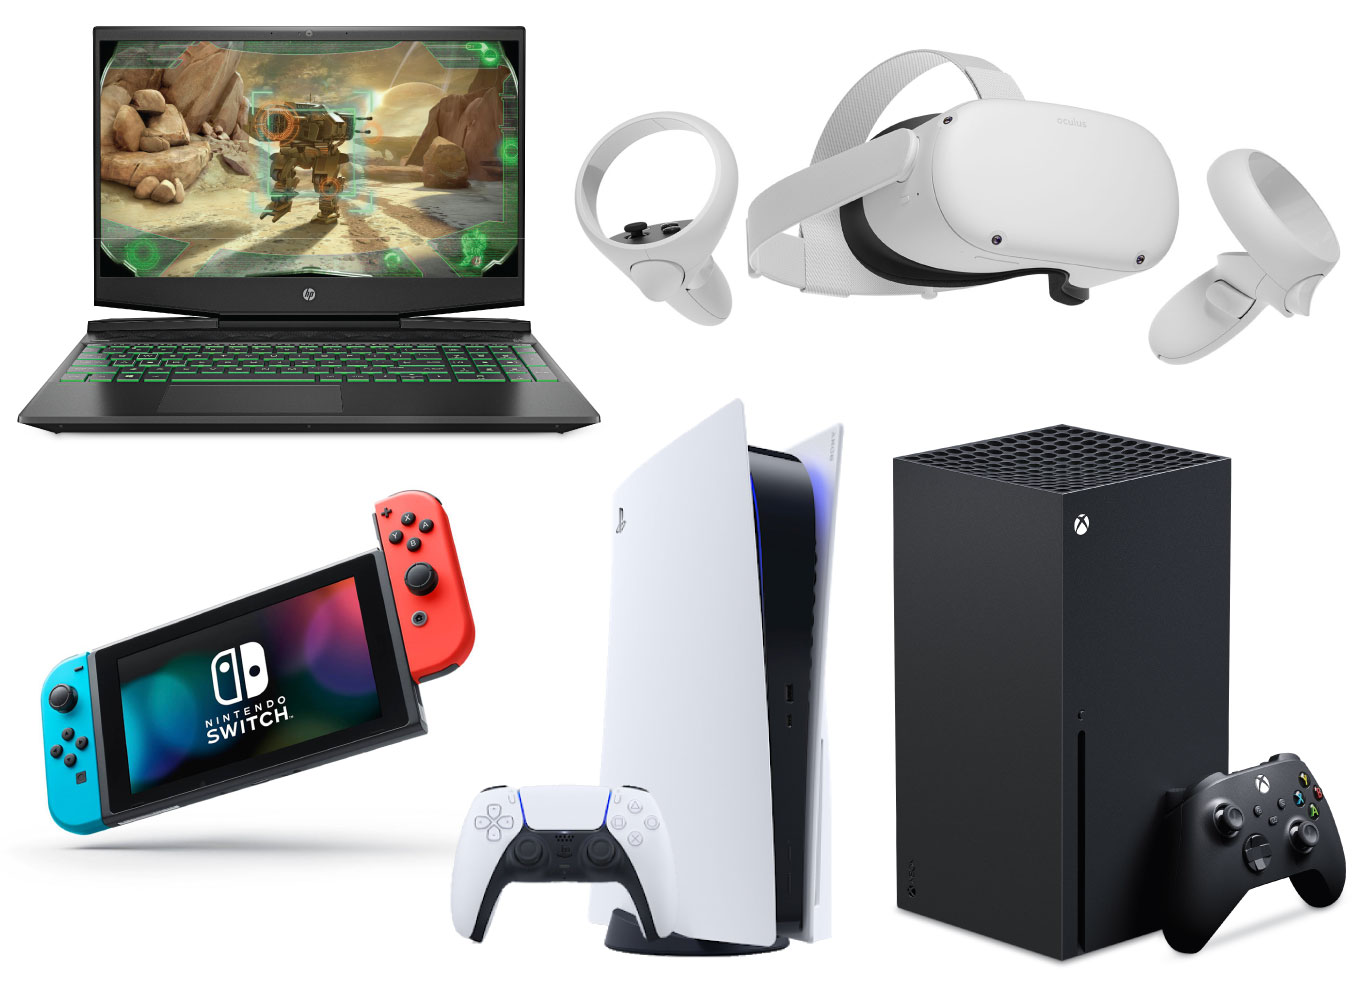 Each of the gaming products listed below are shown against a white background.